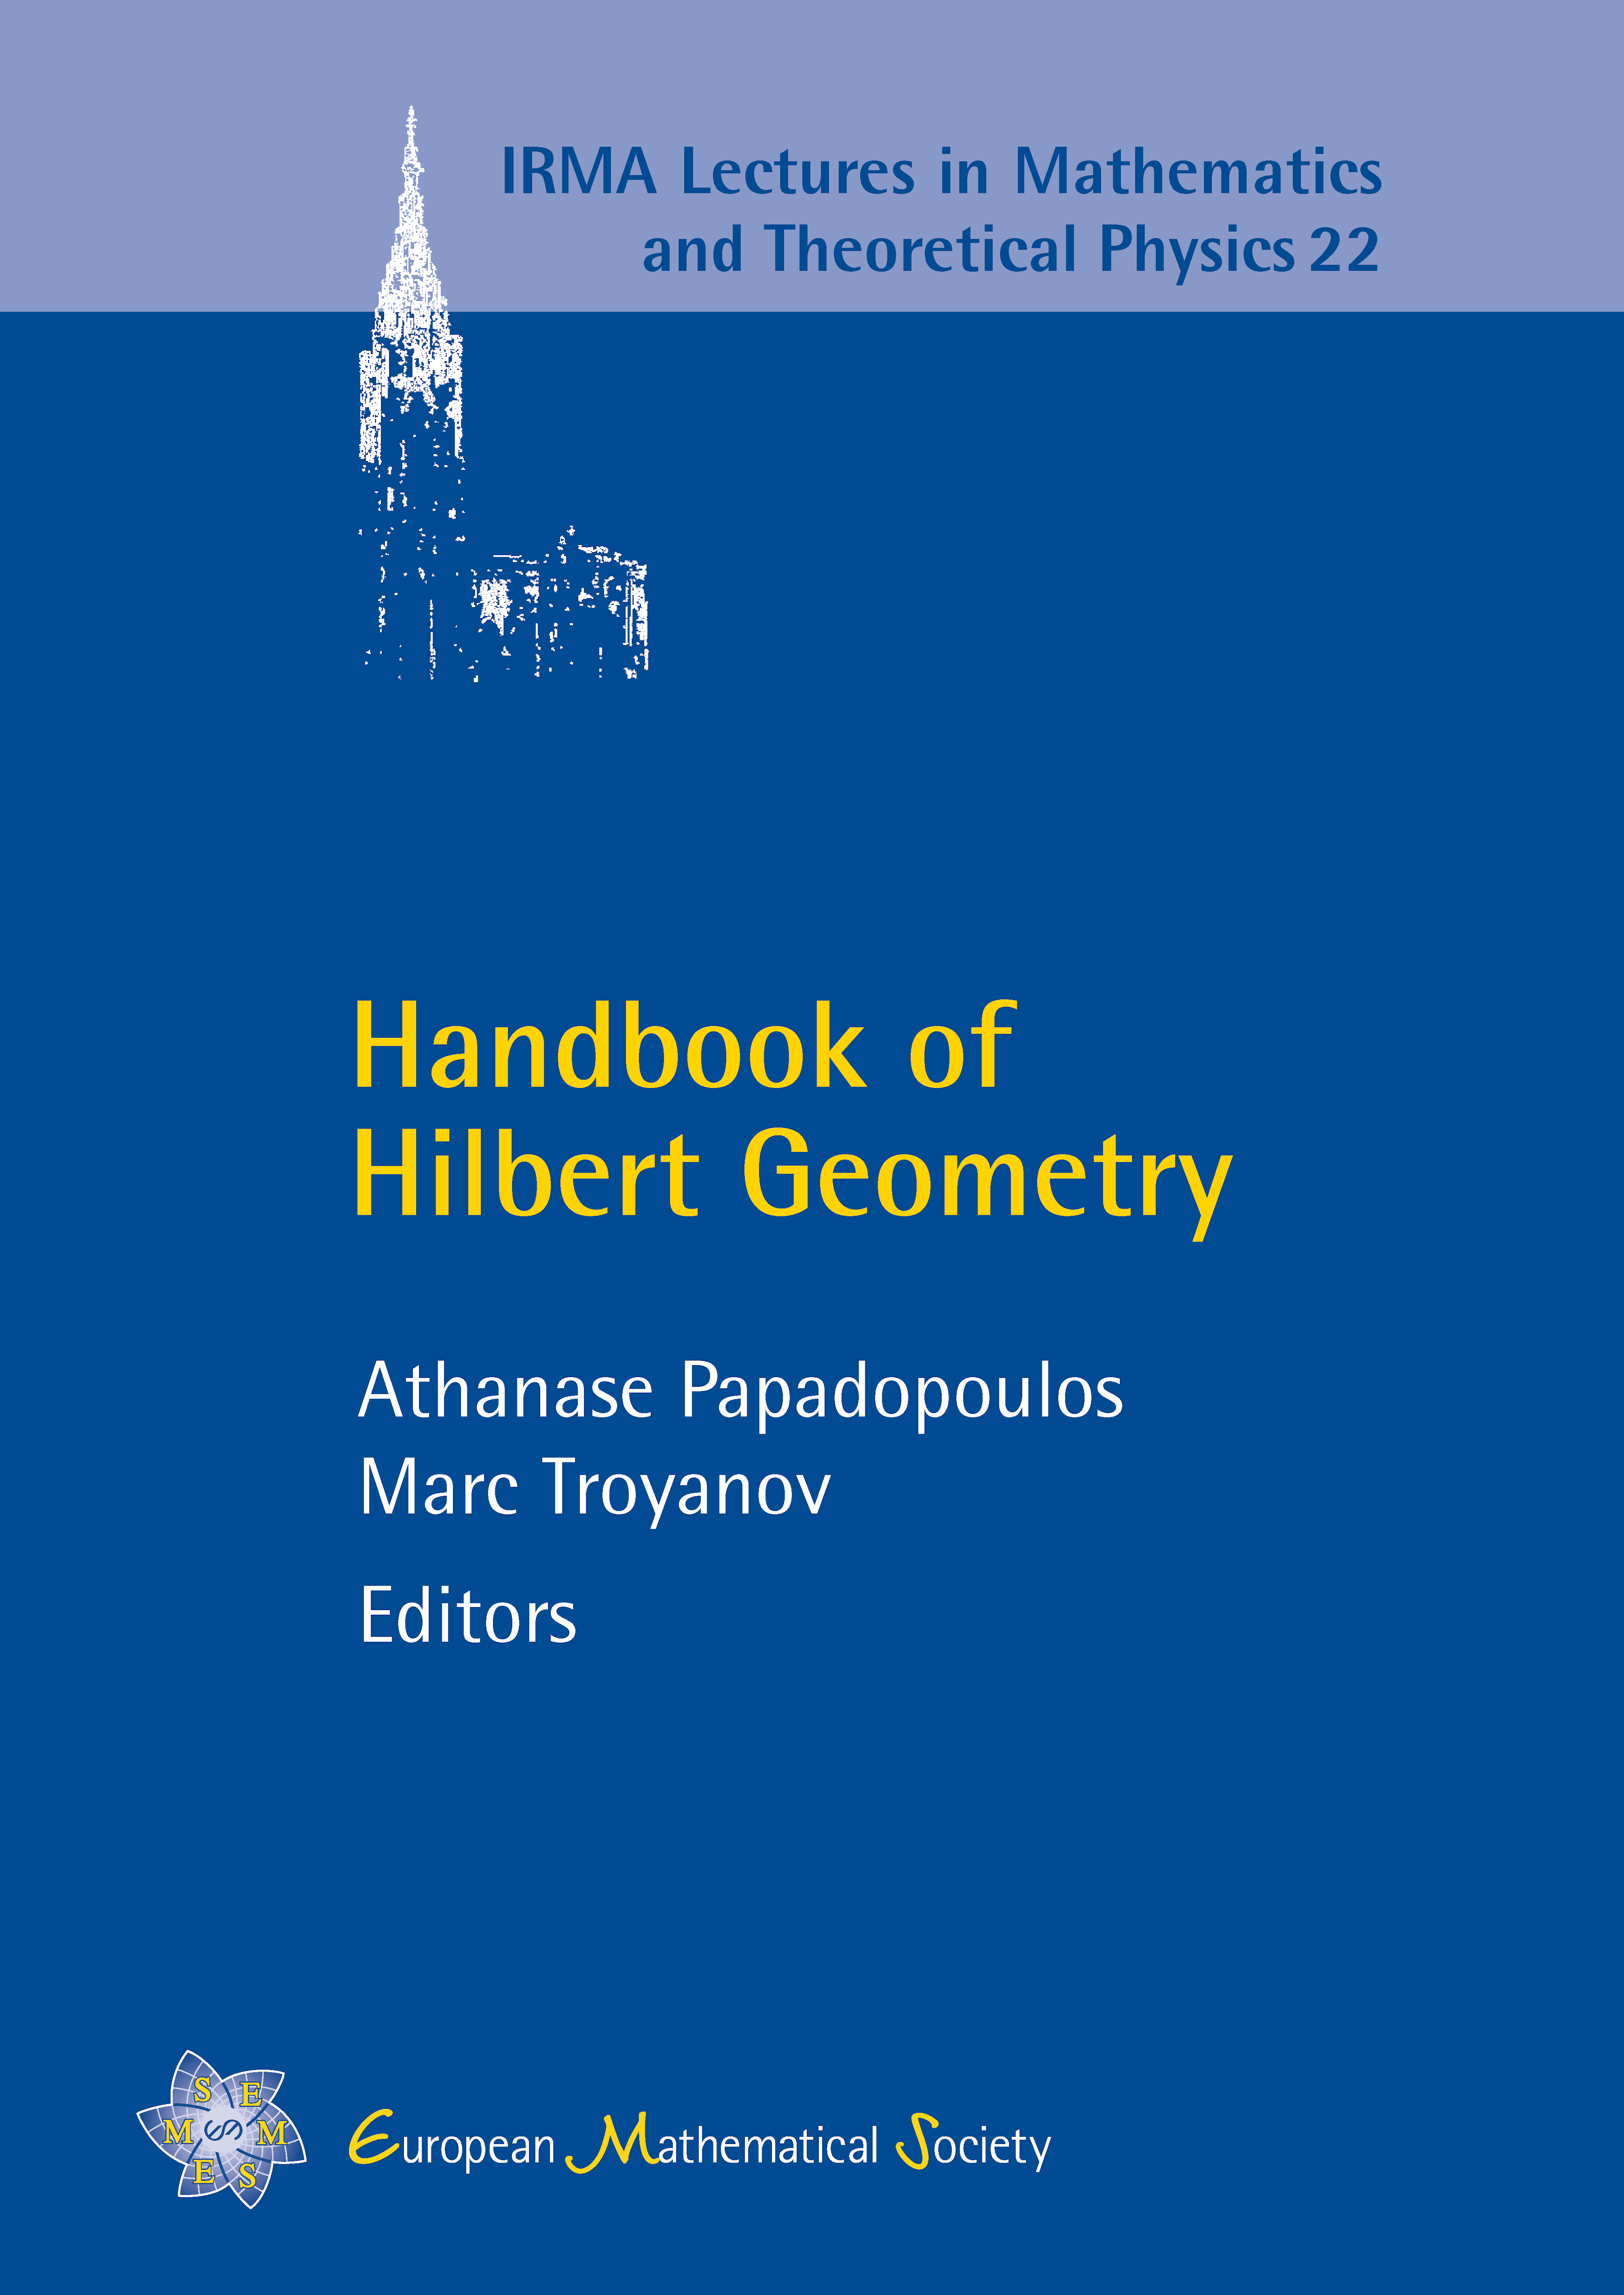 Birkhoff’s version of Hilbert’s metric and its applications in analysis cover